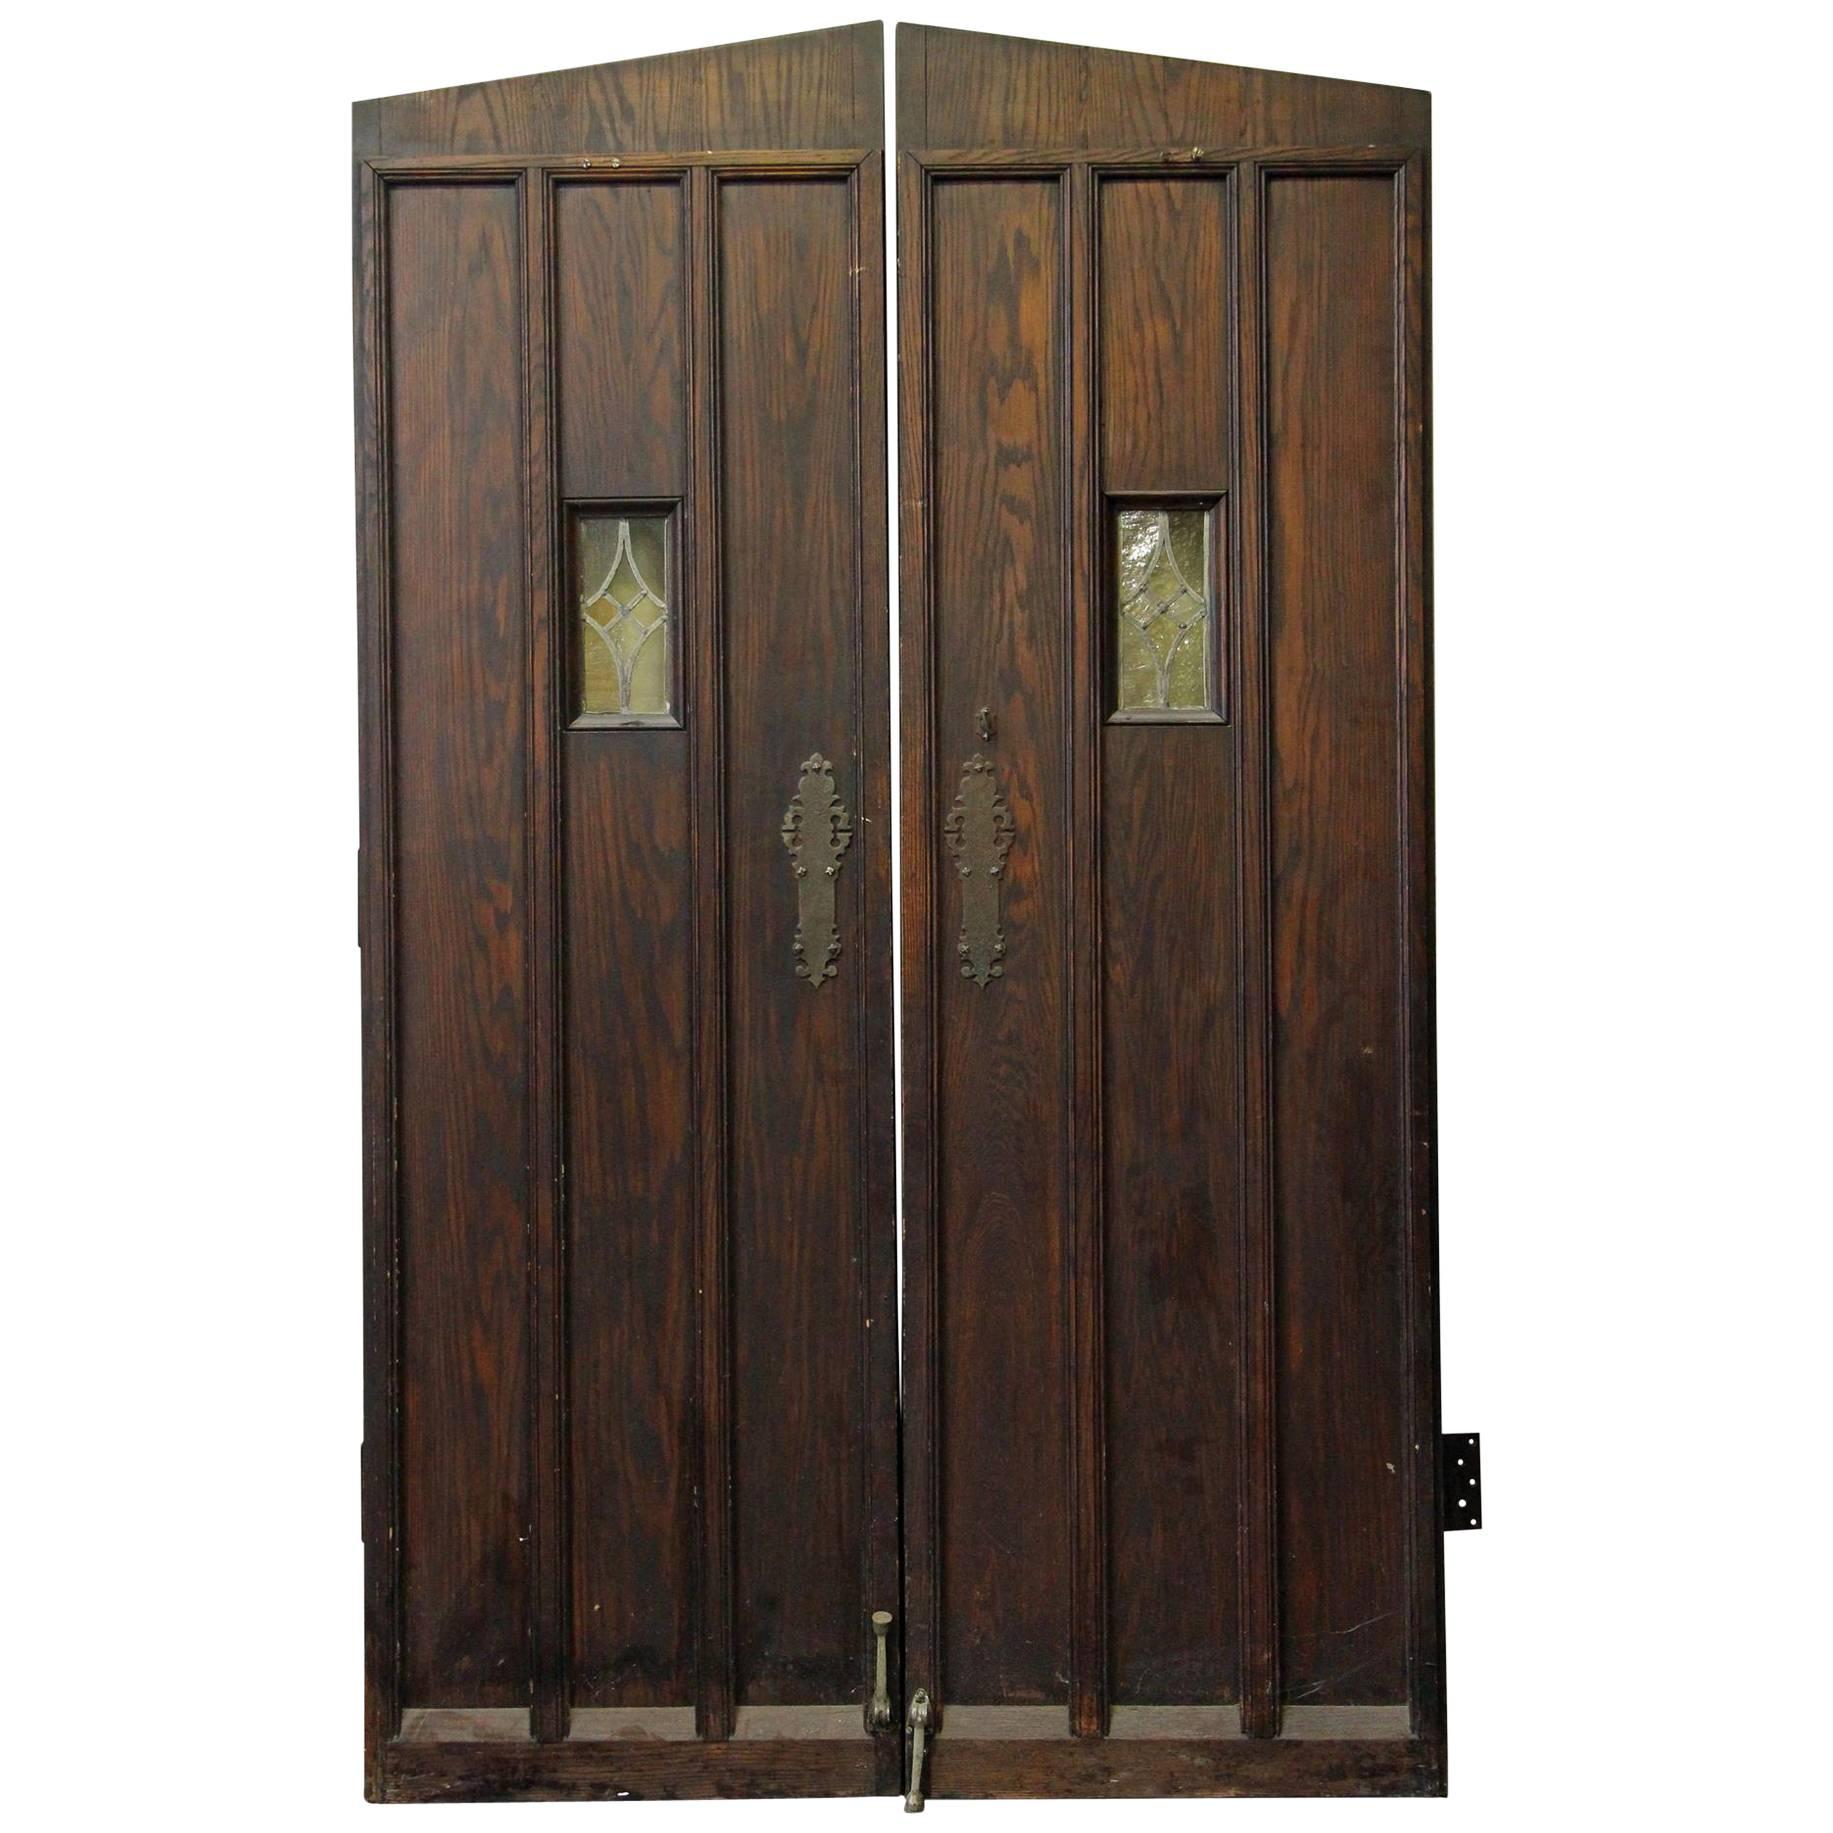 1920s Oak Wine Cellar Double Entry Doors with Gothic Arch